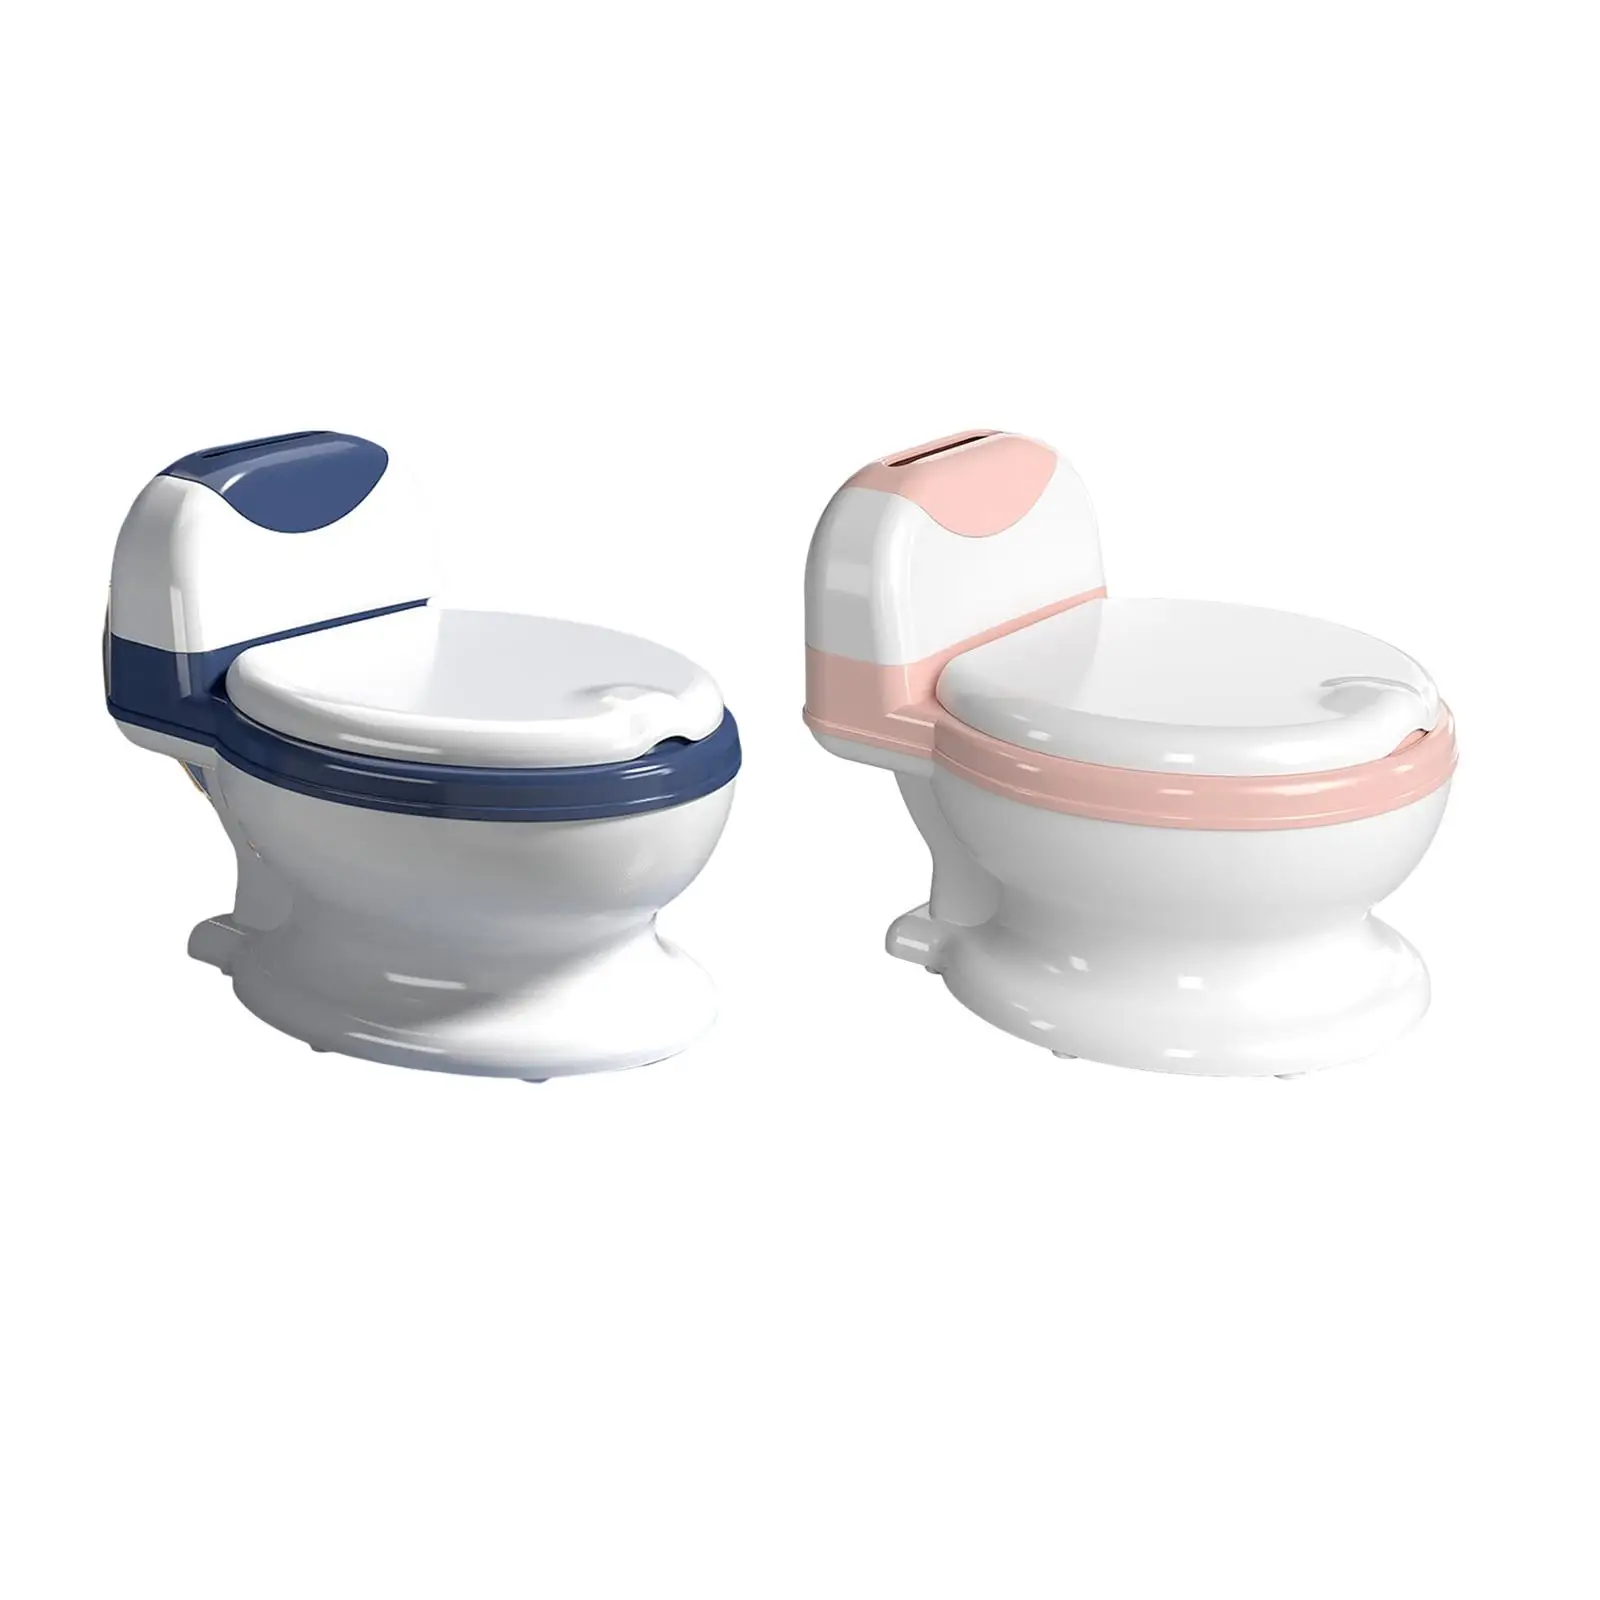 Potty Training Toilet Comfortable Easy to Empty and Clean Realistic Summer My Size Potty Real Feel Potty for Bedroom Baby Boys